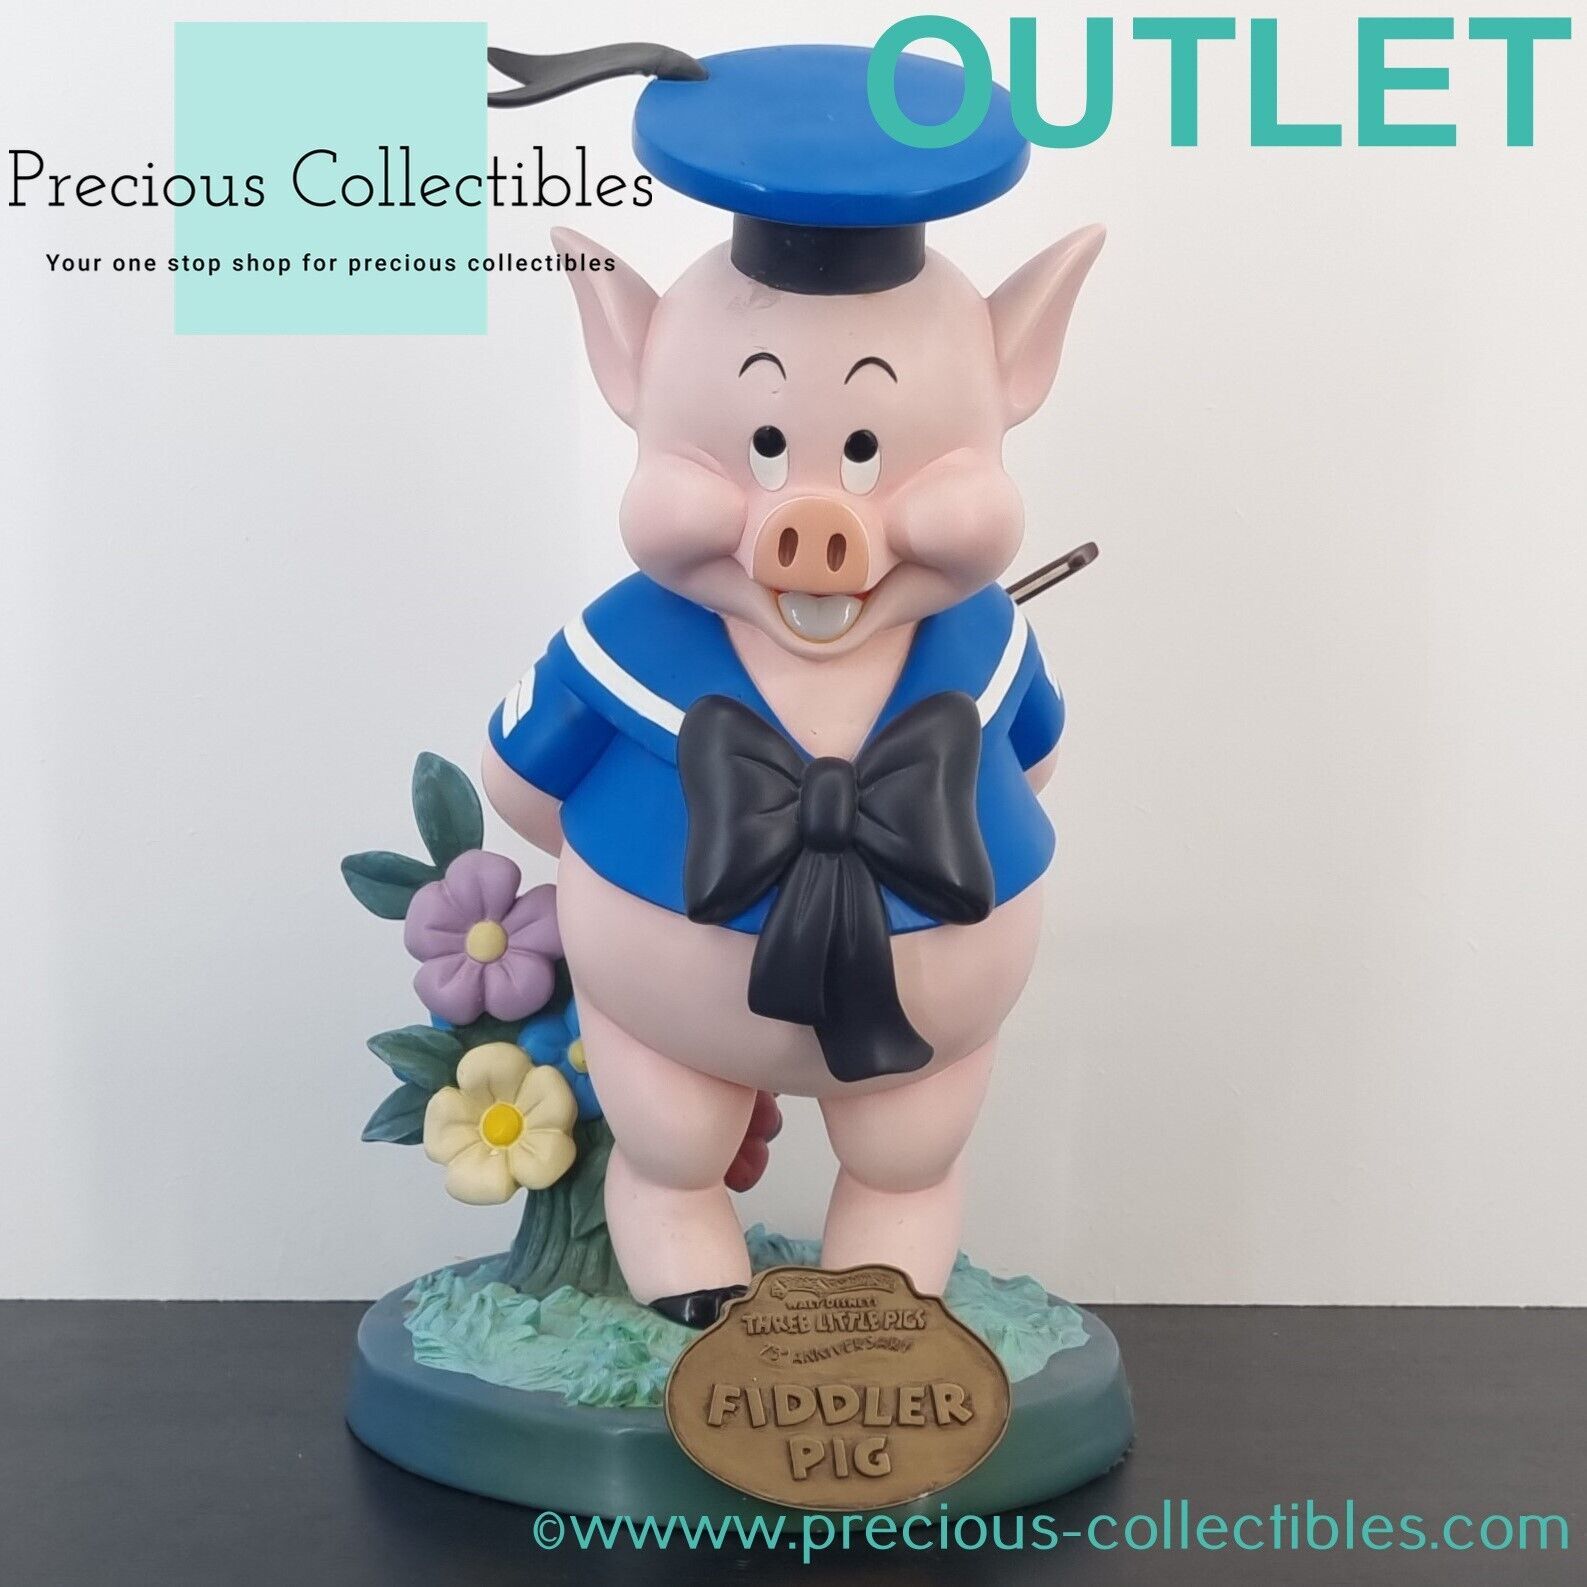 Primary image for Extremely rare! Fidler Pig statue. Three Little Pigs statue